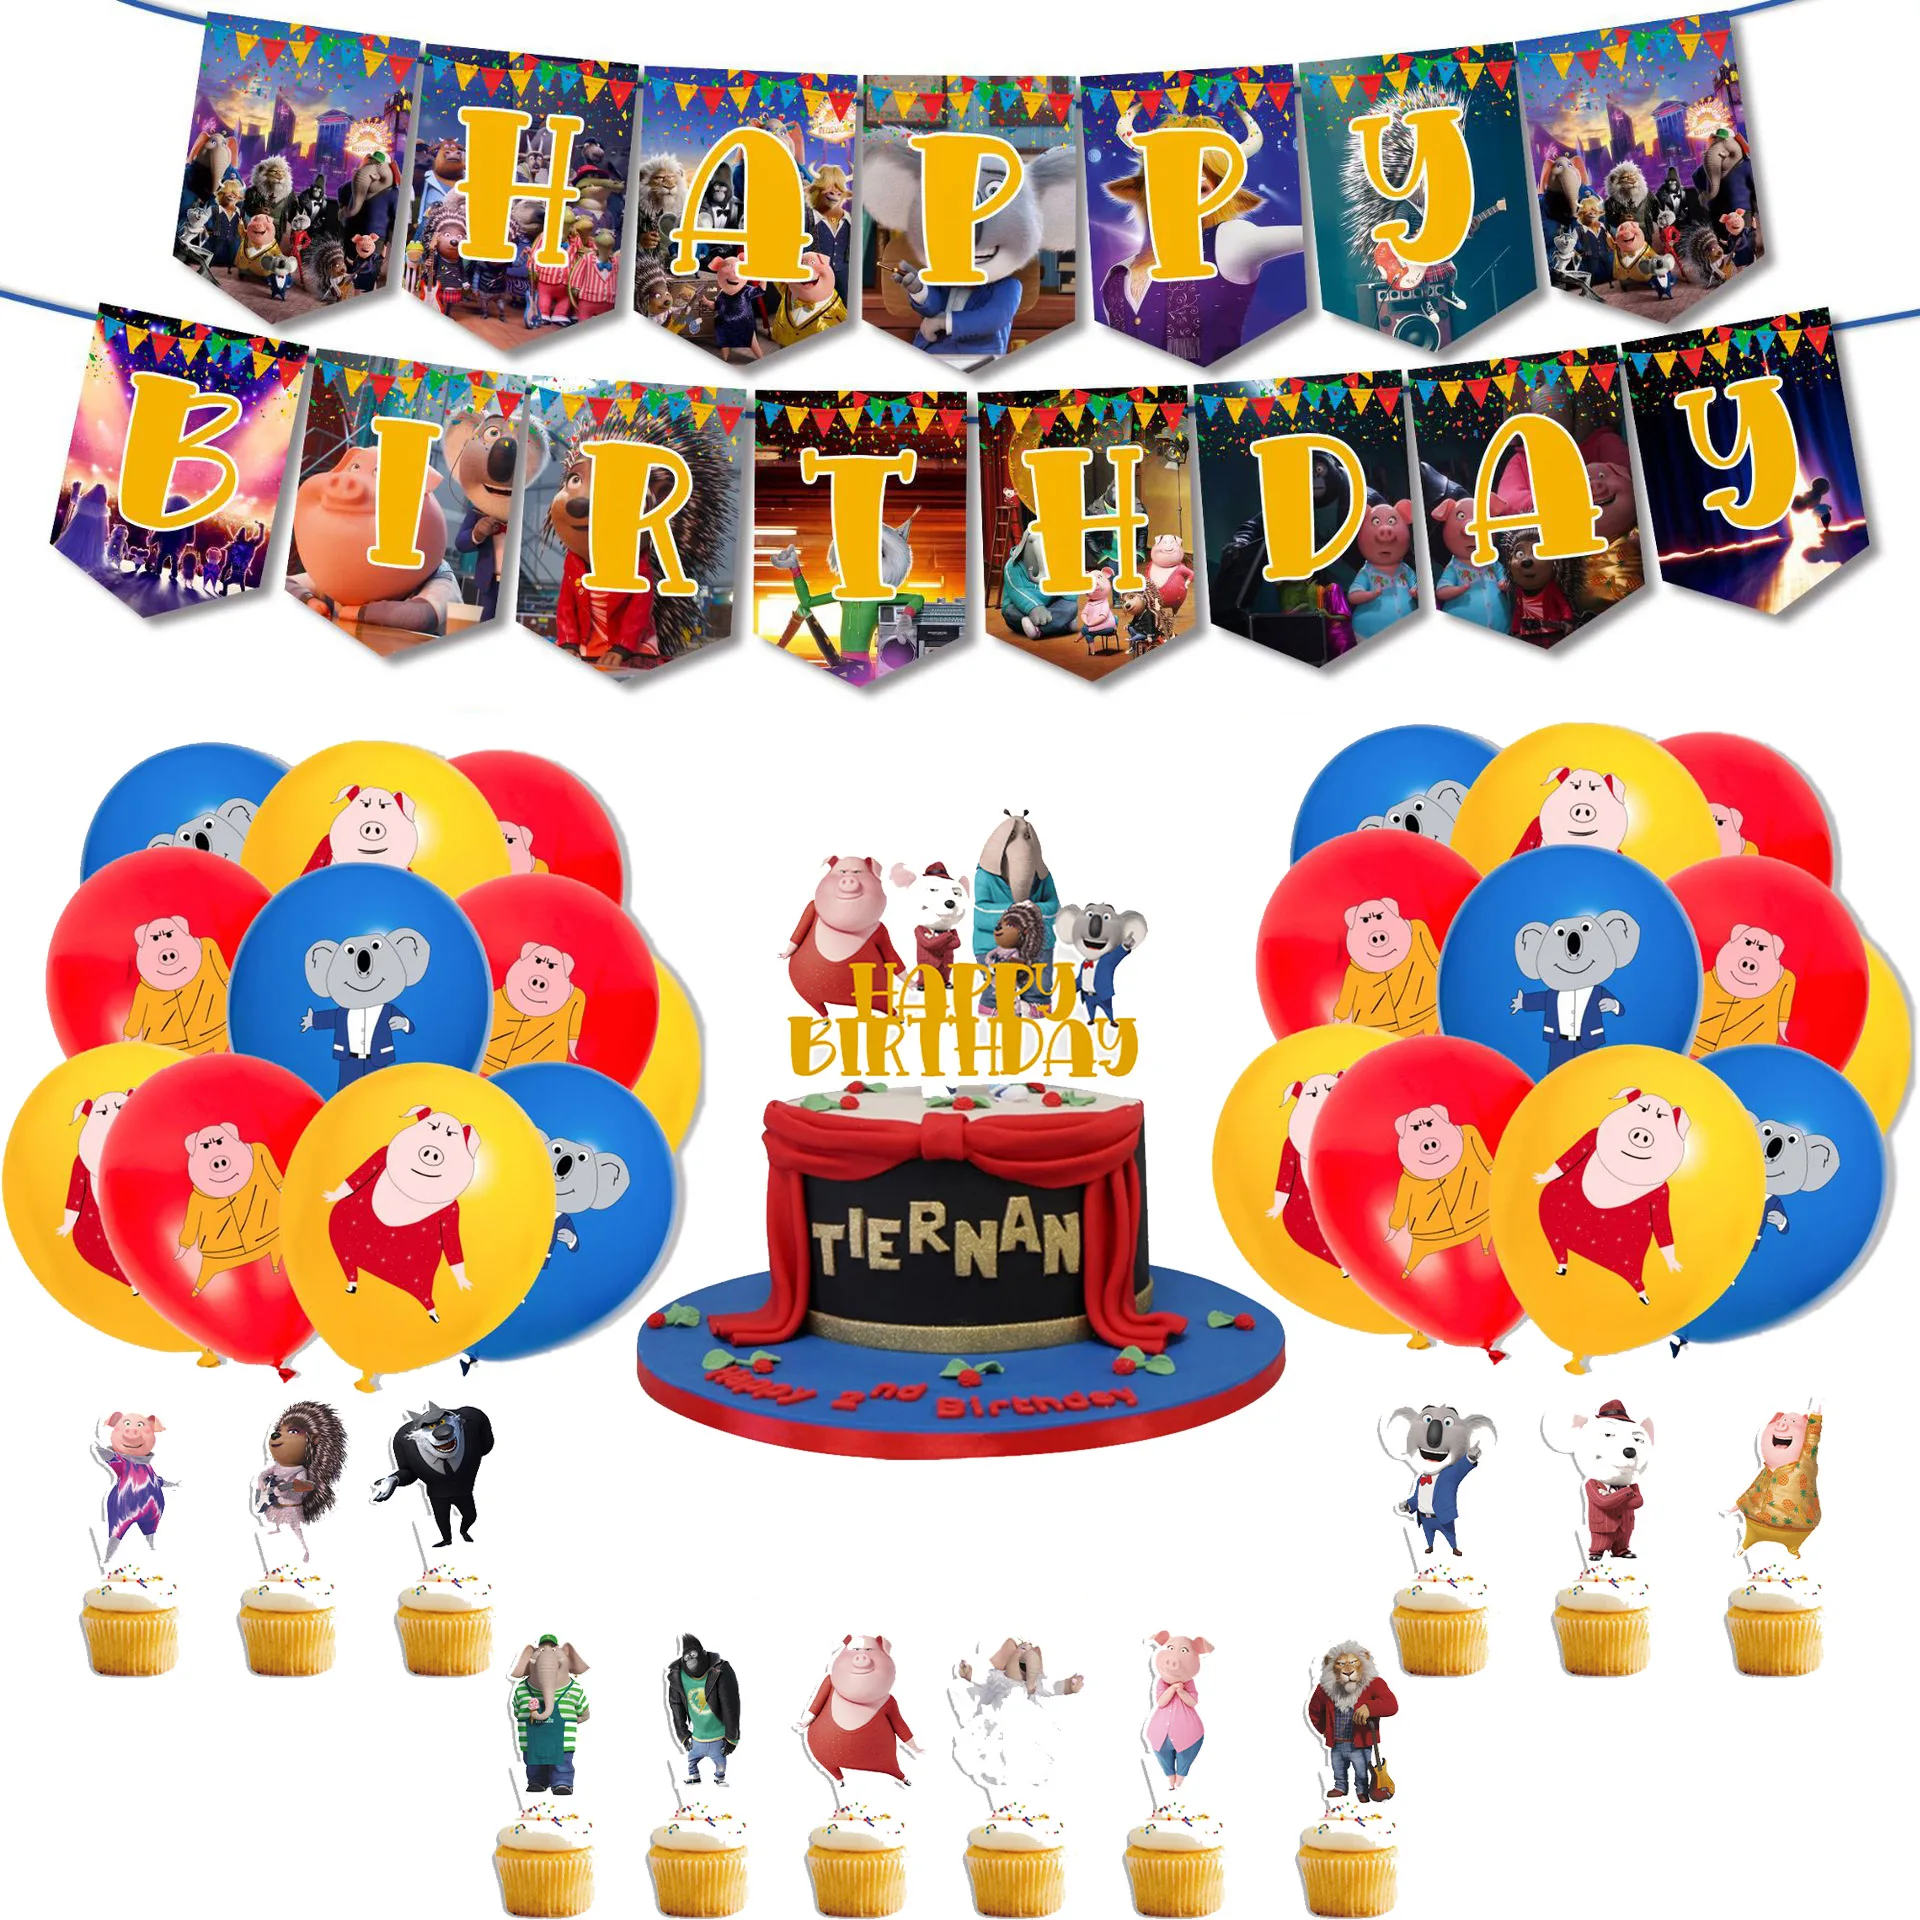 Cartoon Happy Good Sound Animal Singing Theme Birthday Party Supplies Latex Balloon Cake Decoration Banner Baby Shower Girl Gift new disney encanto mirabel birthday party supplies balloon banner cake topper kid faovr gift magic theme party decor baby shower